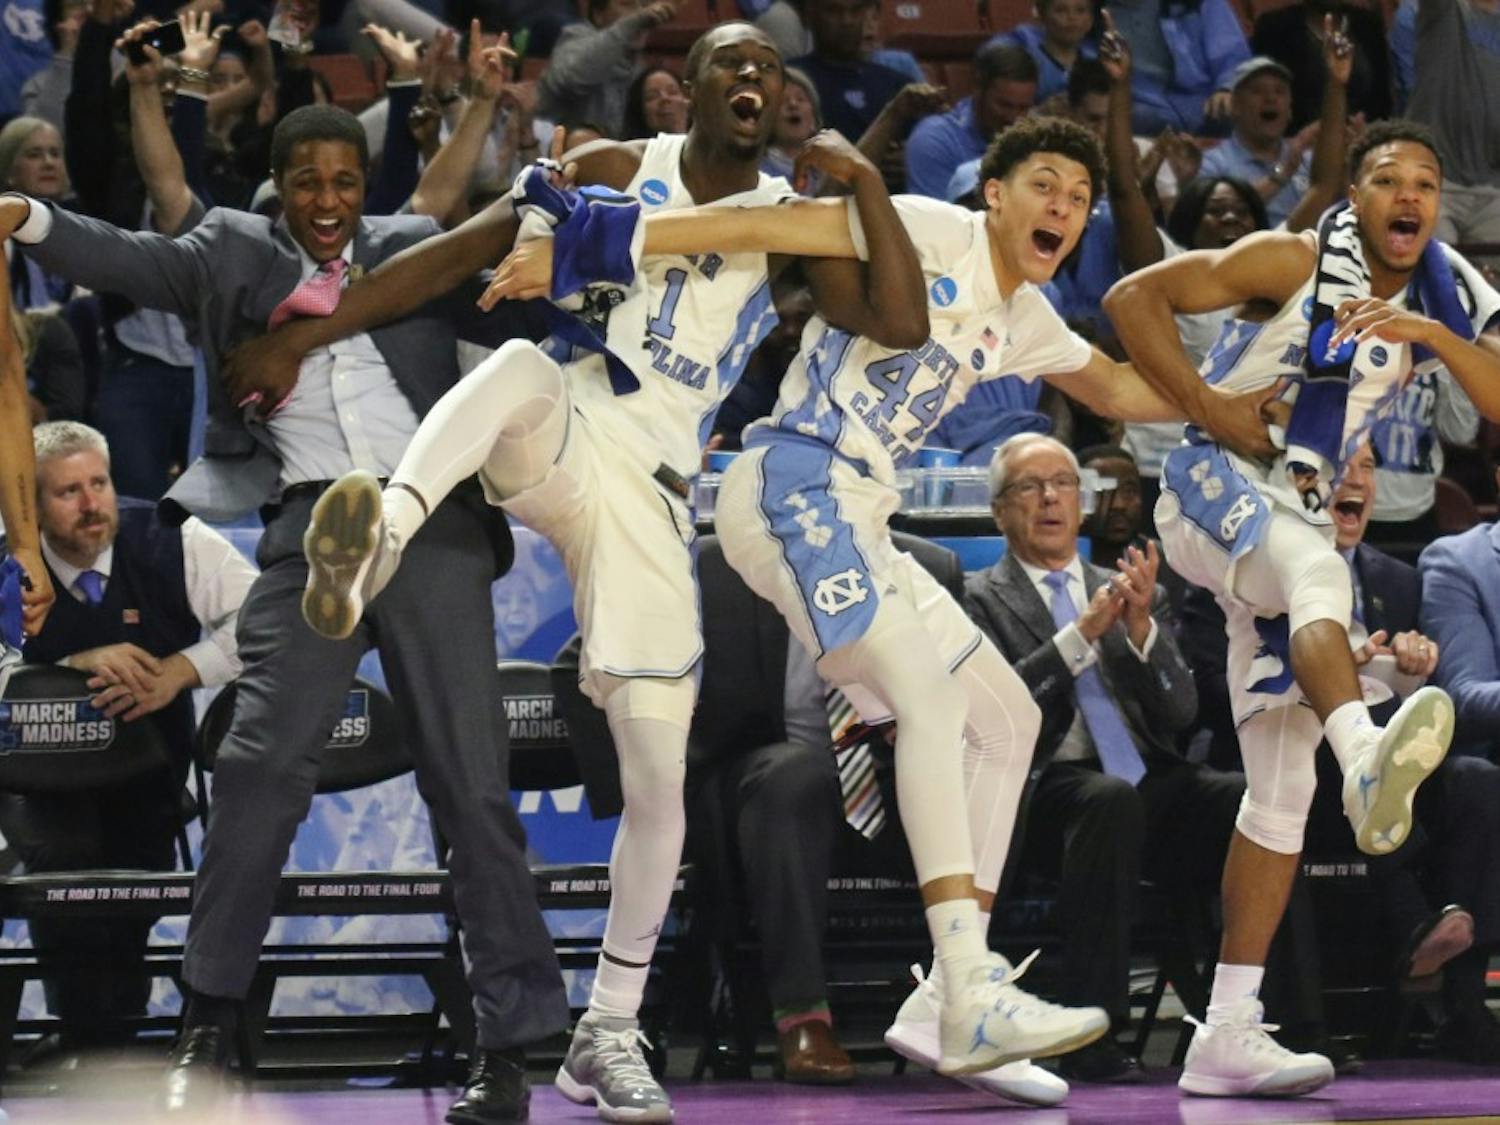 The North Carolina men's basketball team defeated Texas Southern 103-64 in the first round of the NCAA Tournament in Greenville on Friday. The Tar Heels will play Arkansas in the second round on Sunday.